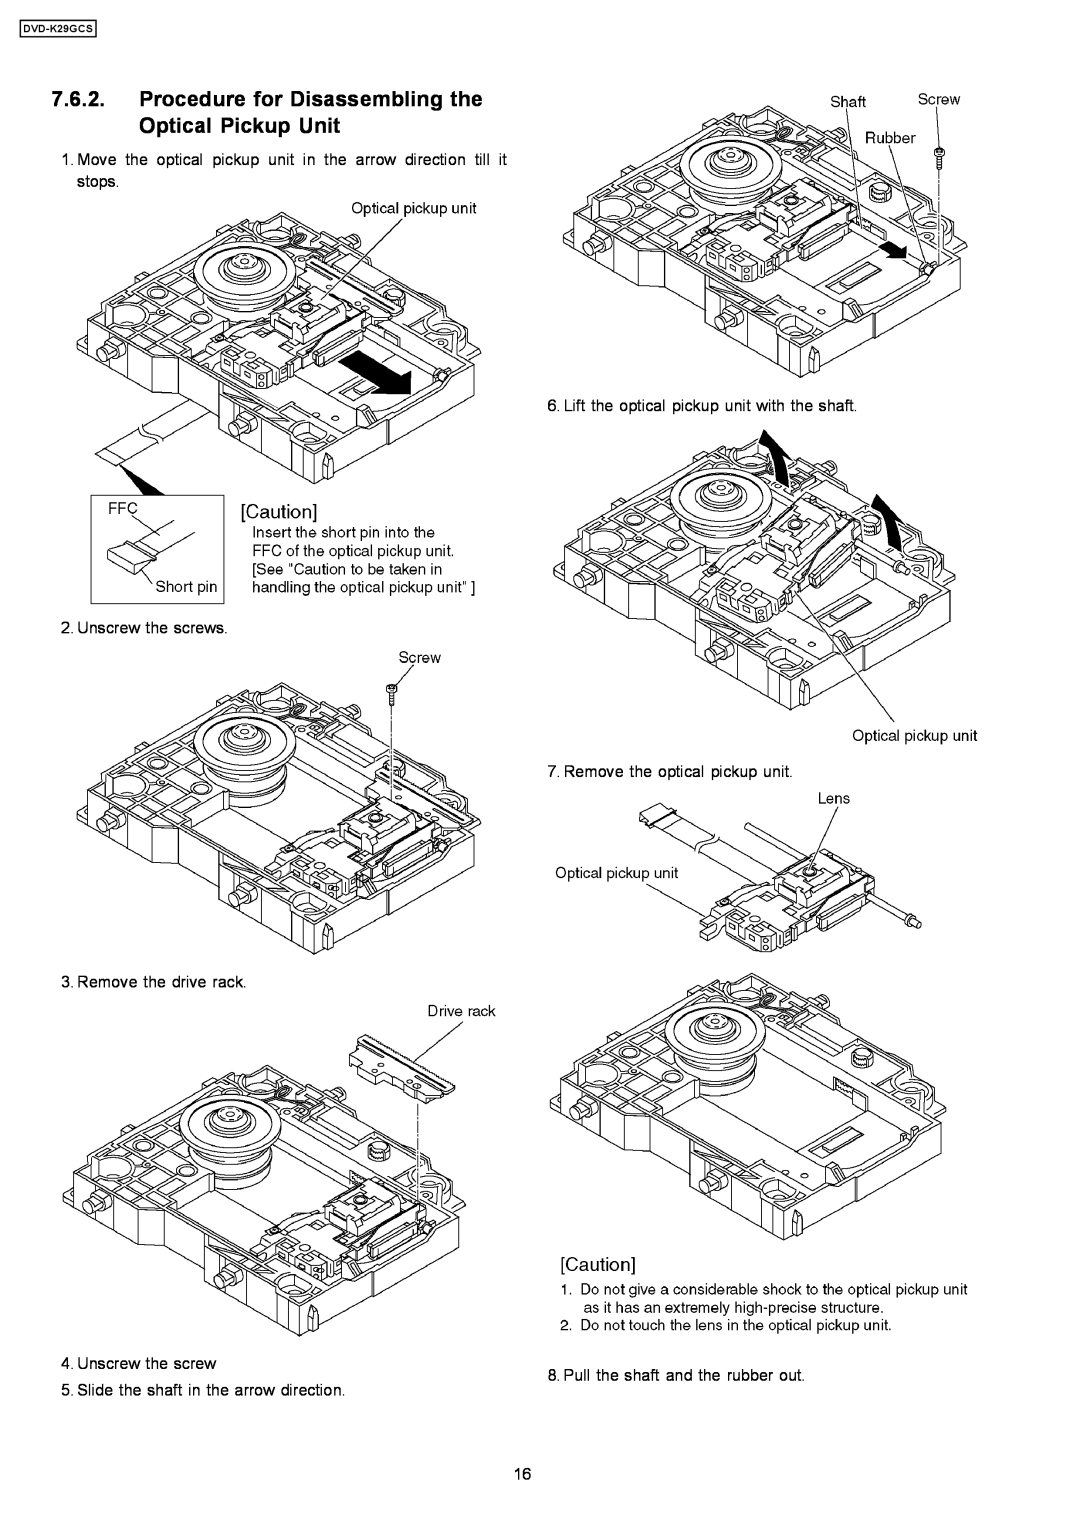 Panasonic DVD-K29GCS specifications Unscrew the screws 3. Remove the drive rack, Slide the shaft in the arrow direction 